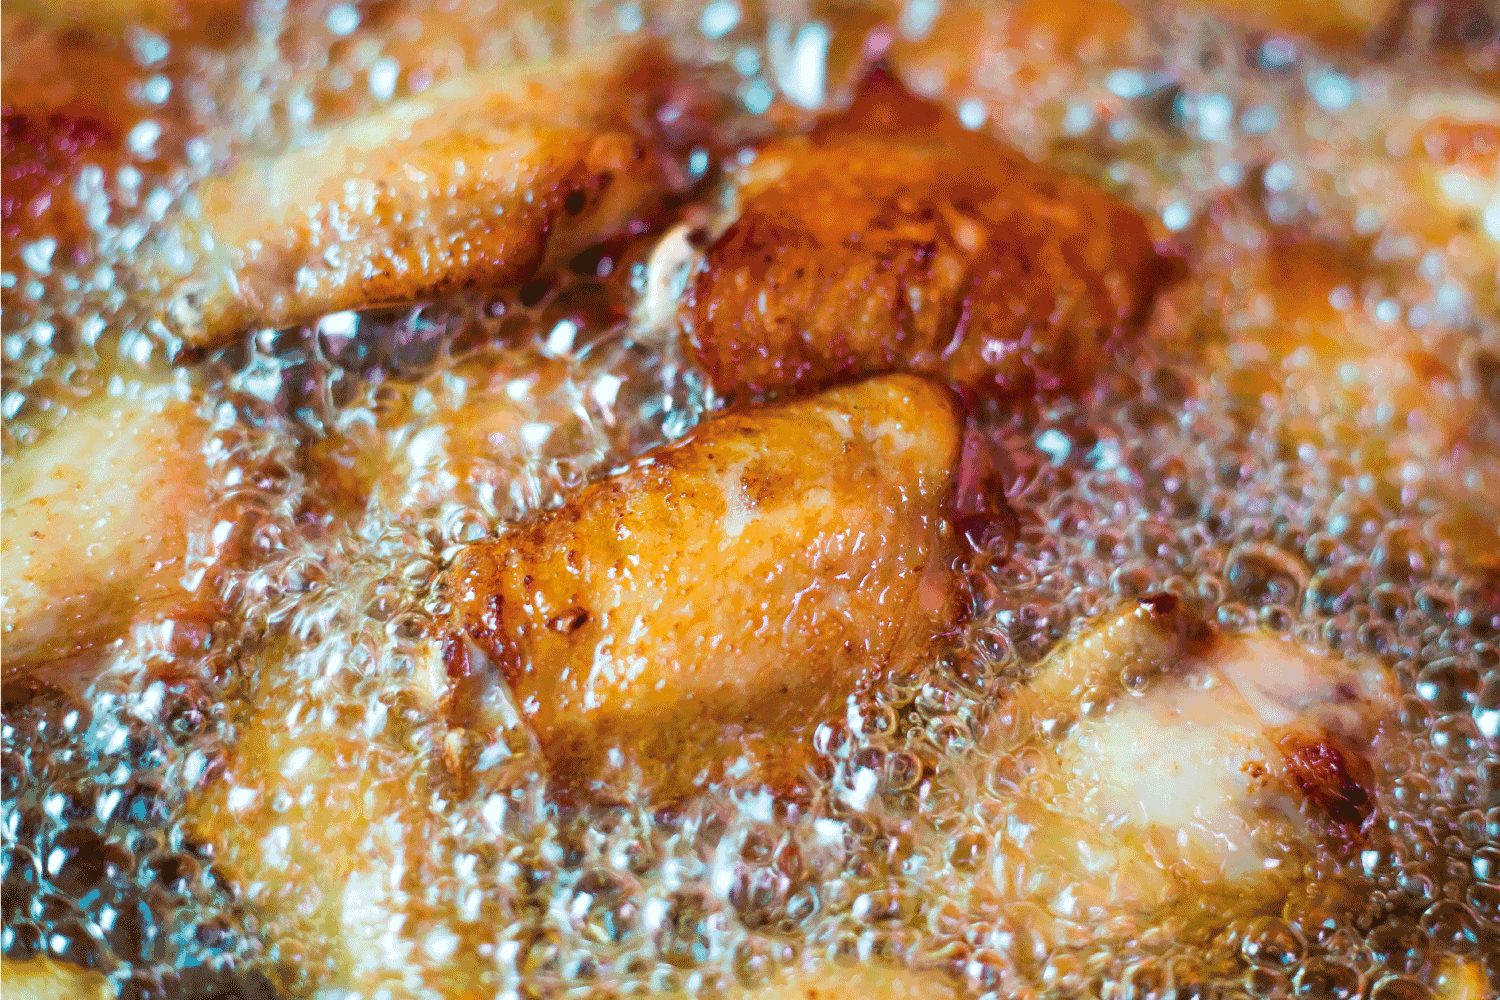 Close up fried chicken wings in boiling oil